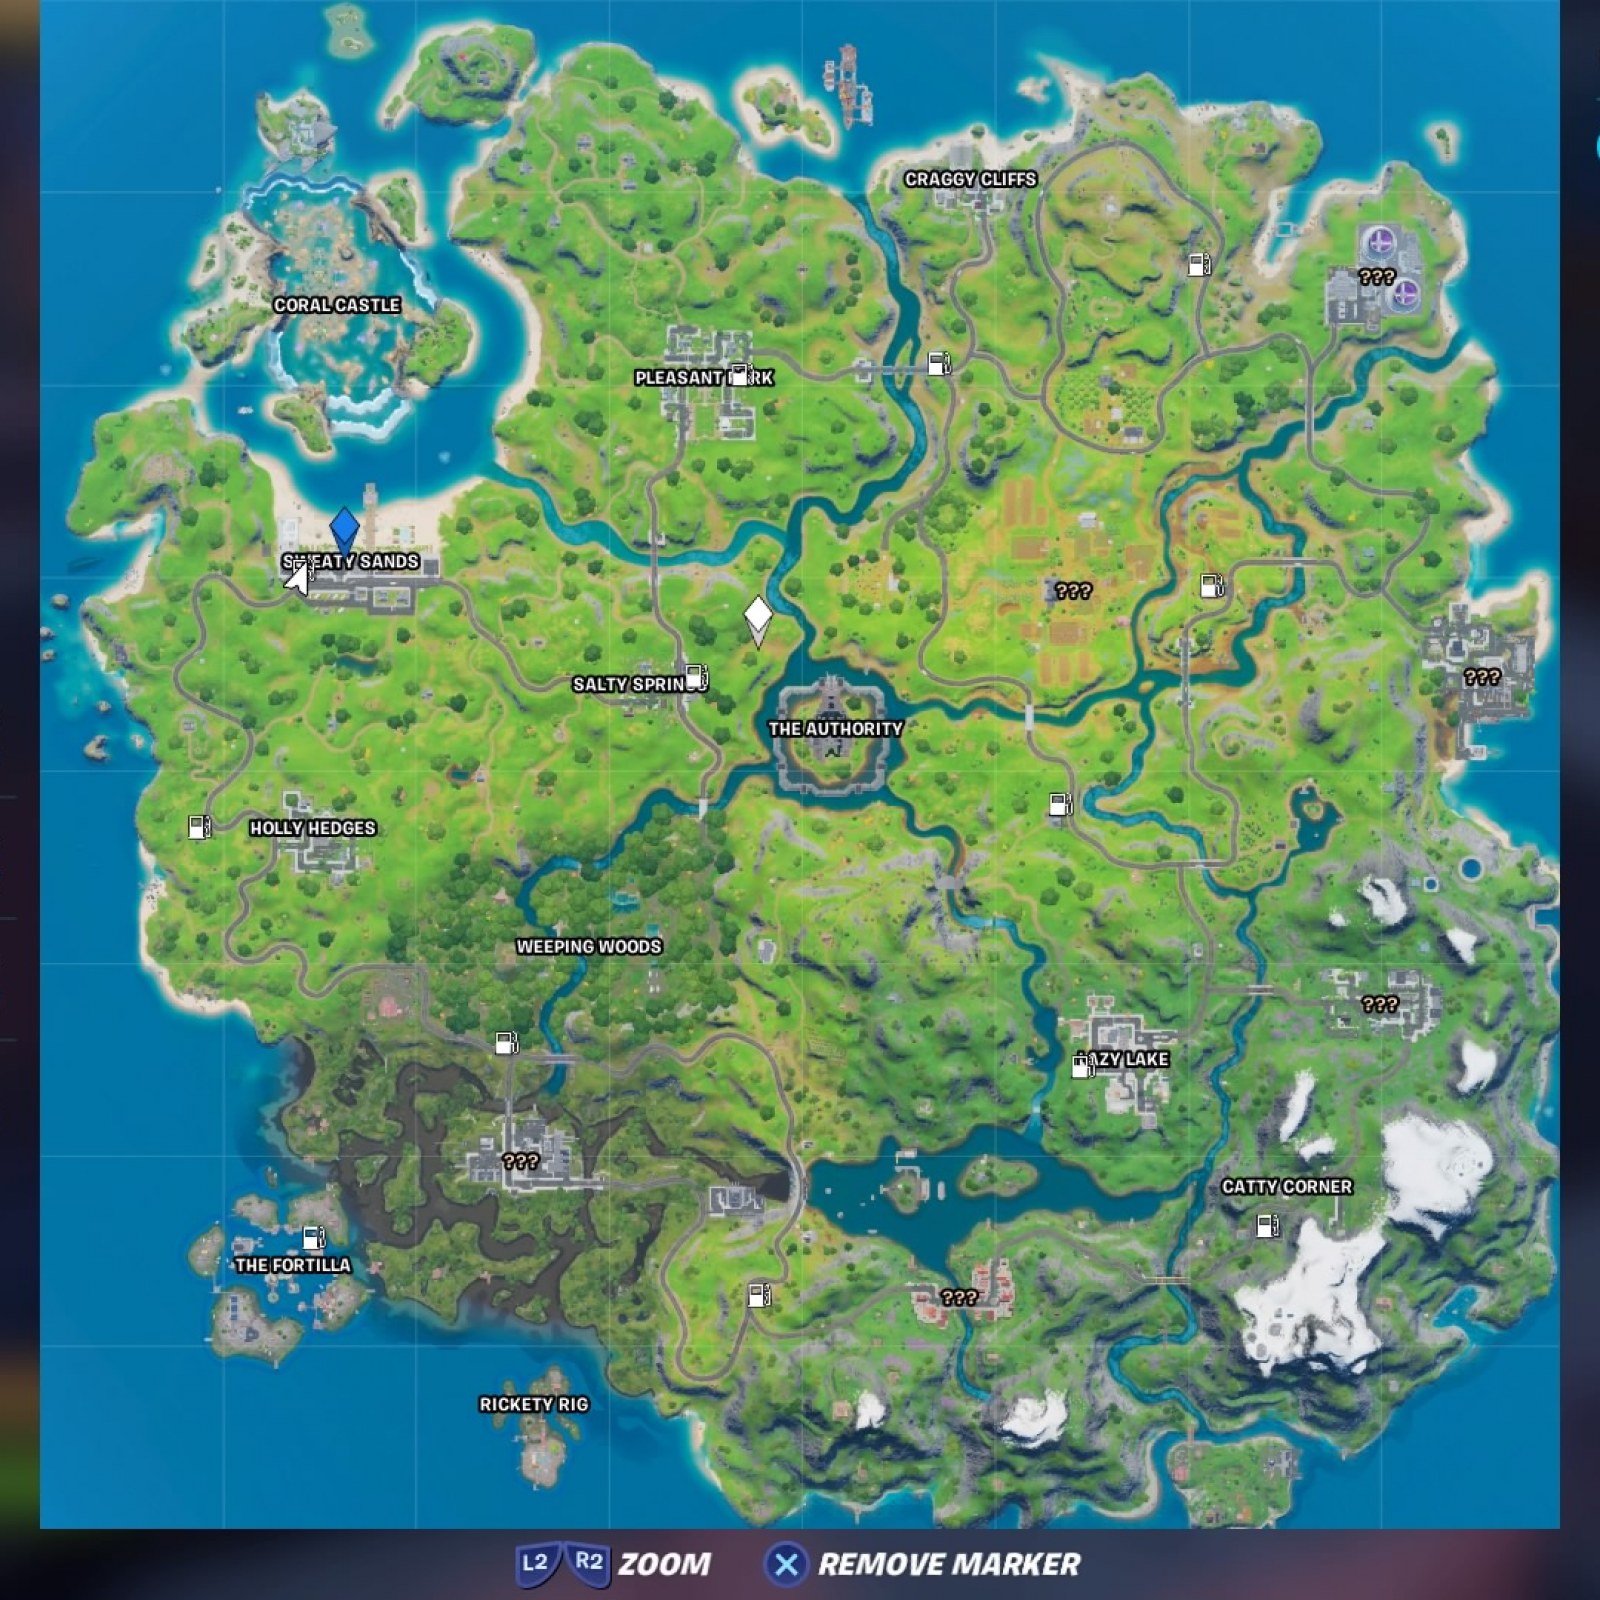 What Is A Gas Punkin In Fortnite Fortnite Cars Guide Locations How To Gas Up Where To Find Gas Cans